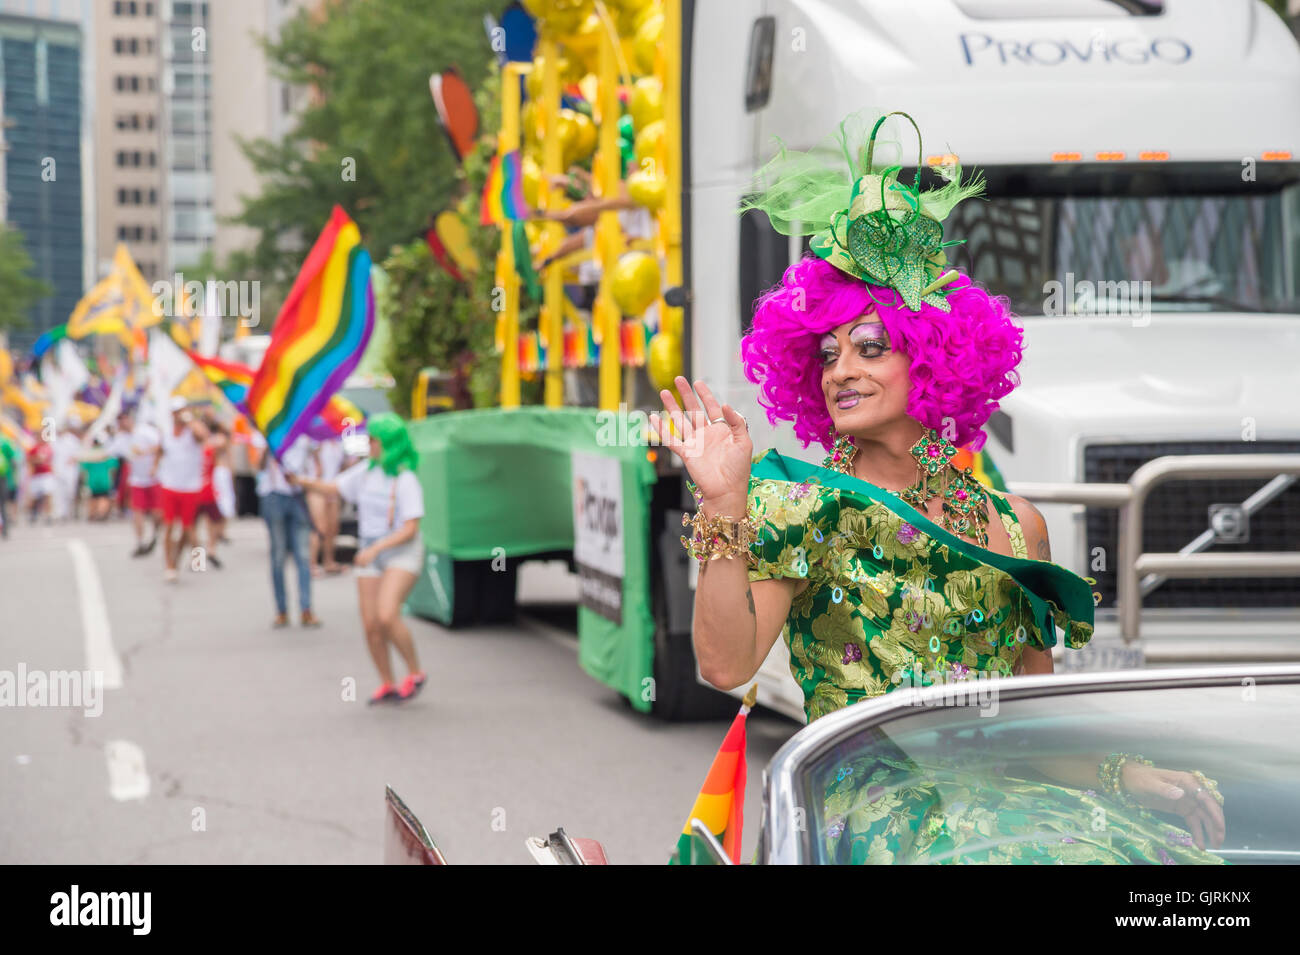 Montreal, CA - 14 August 2016: Mado at Montreal Pride Parade. Mado is a famous drag-queen who runs a drag cabaret, Cabaret Mado, Stock Photo